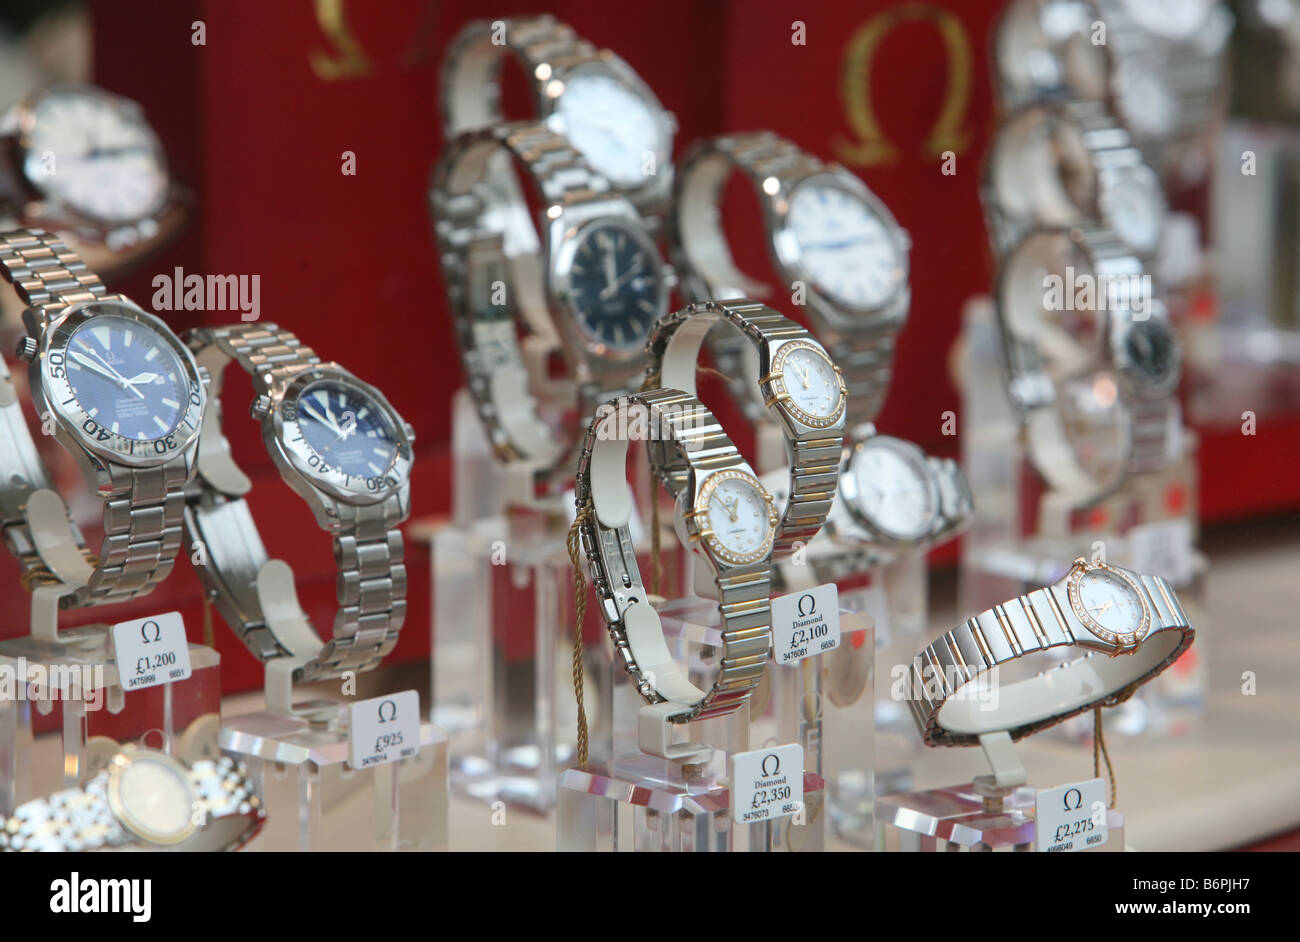 Omega watches on display in the window of an Ernest Jones store in Moorgate London Stock Photo